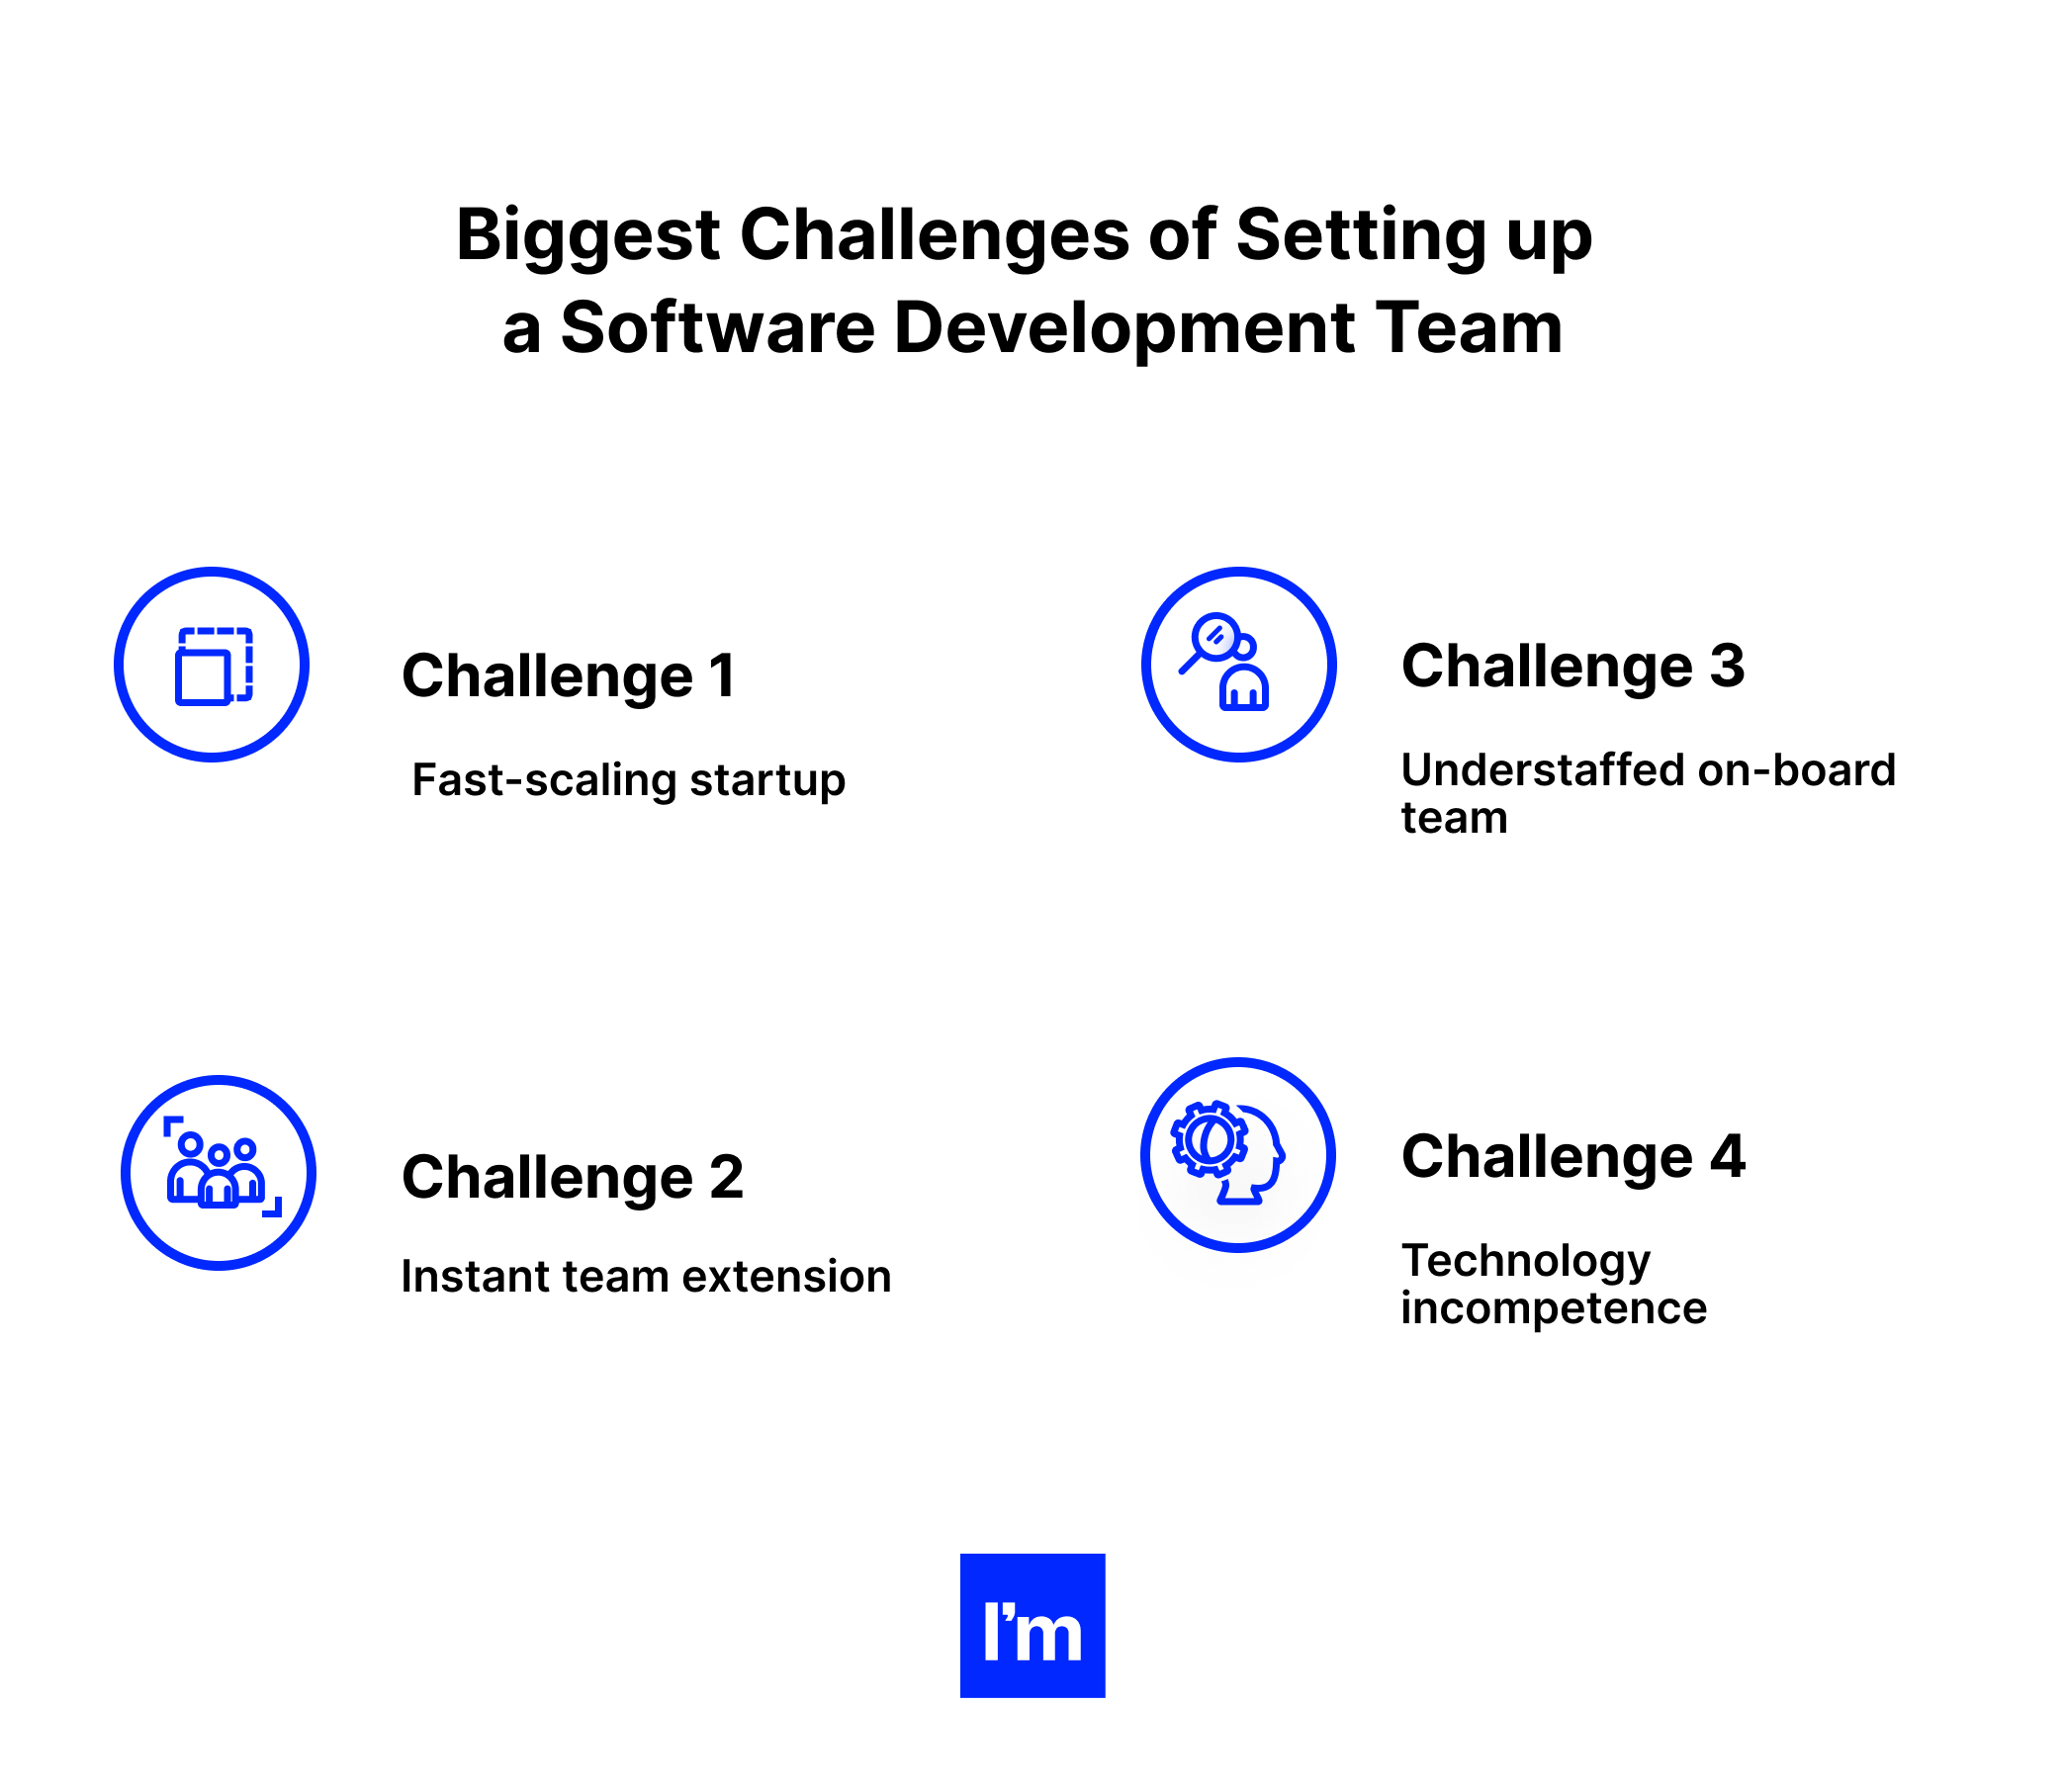 Biggest Challenges of Setting up a Software Development Team